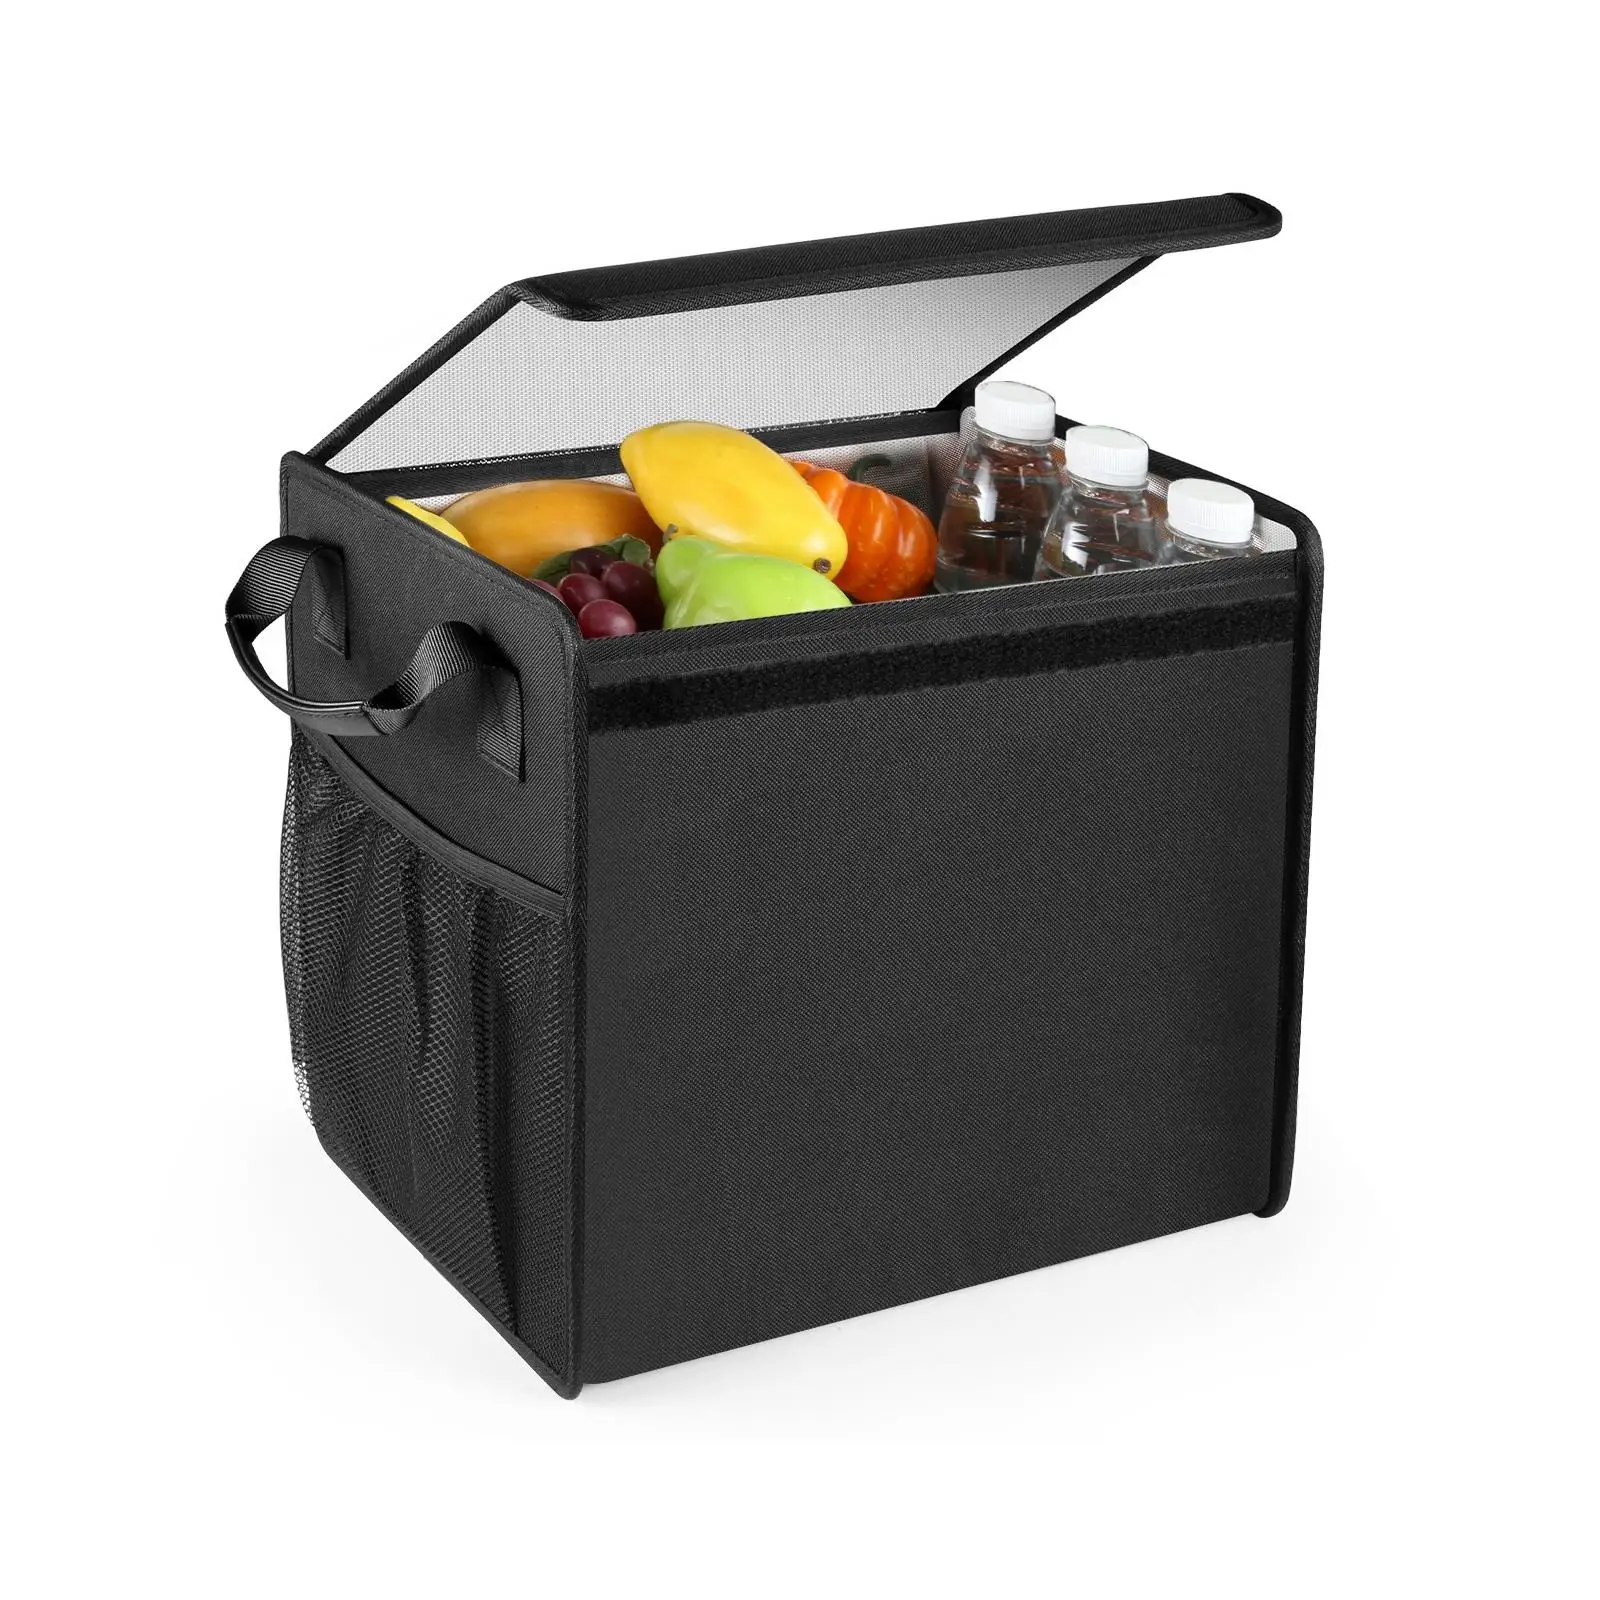 

Car Trunk Organizer Cargo Storage Container Collapsible Sturdy Expandable Multi